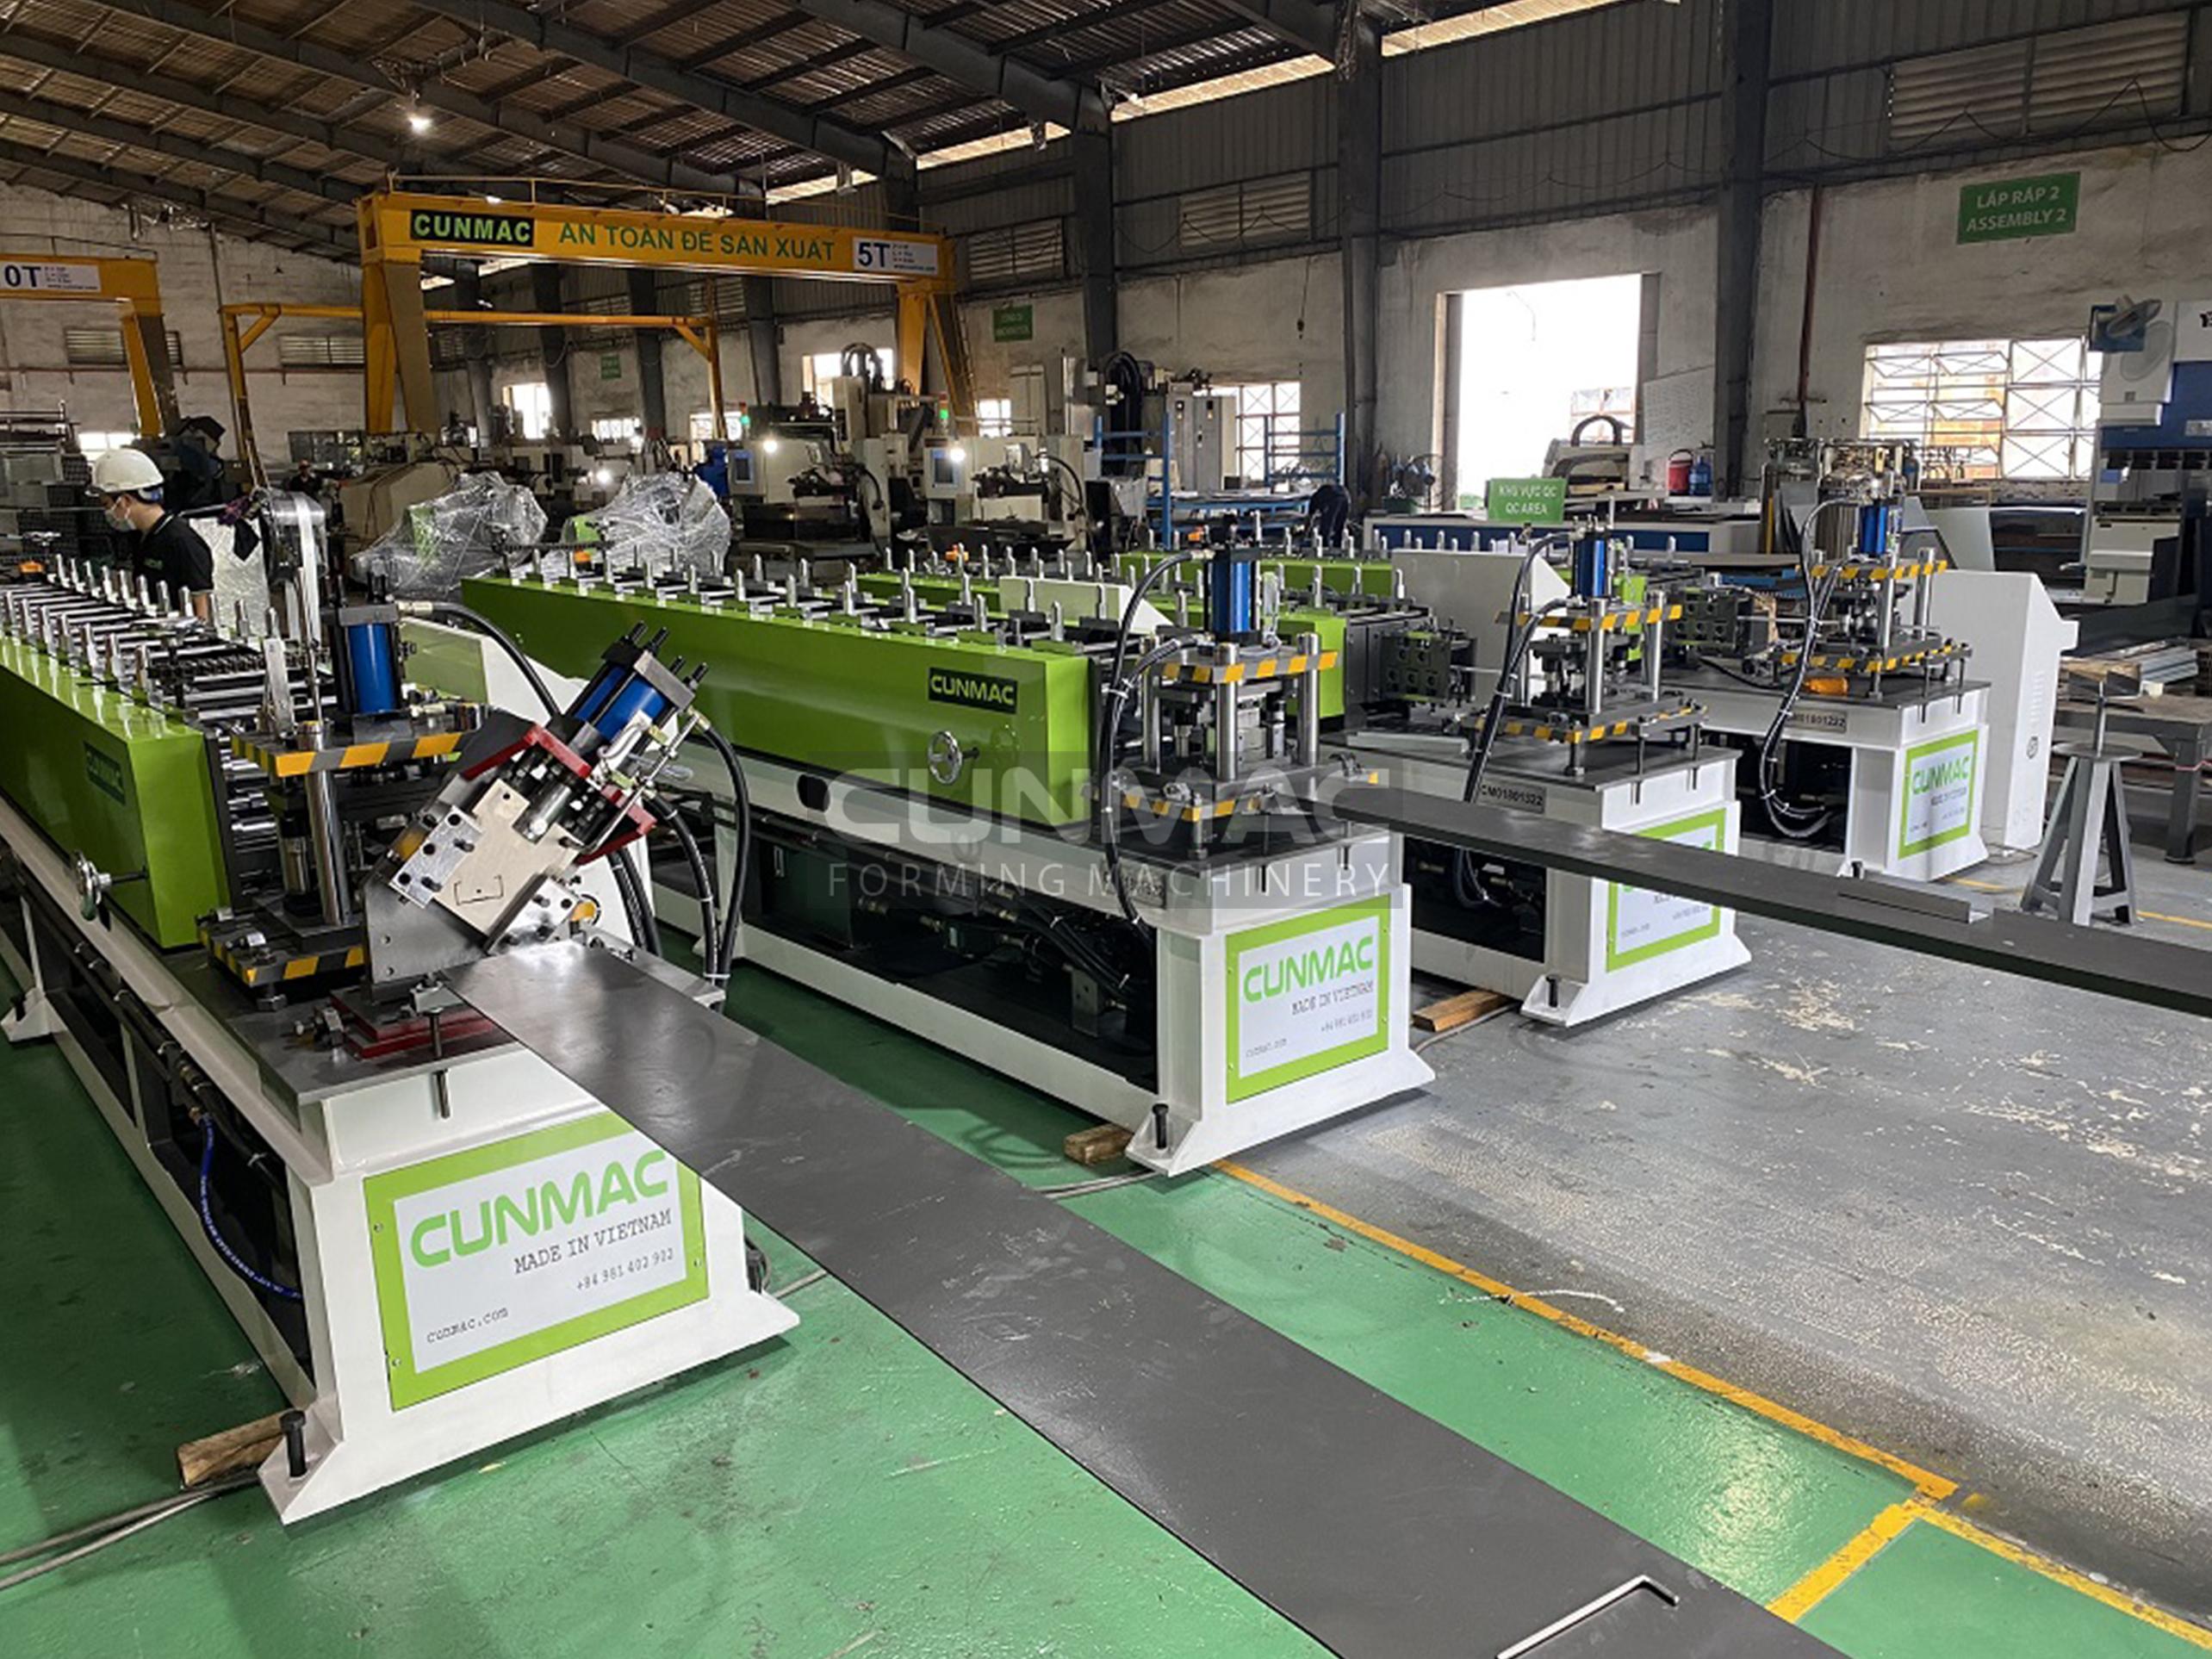 Full set of C ceiling/C line and Wall cladding frame roll forming machines to our customer